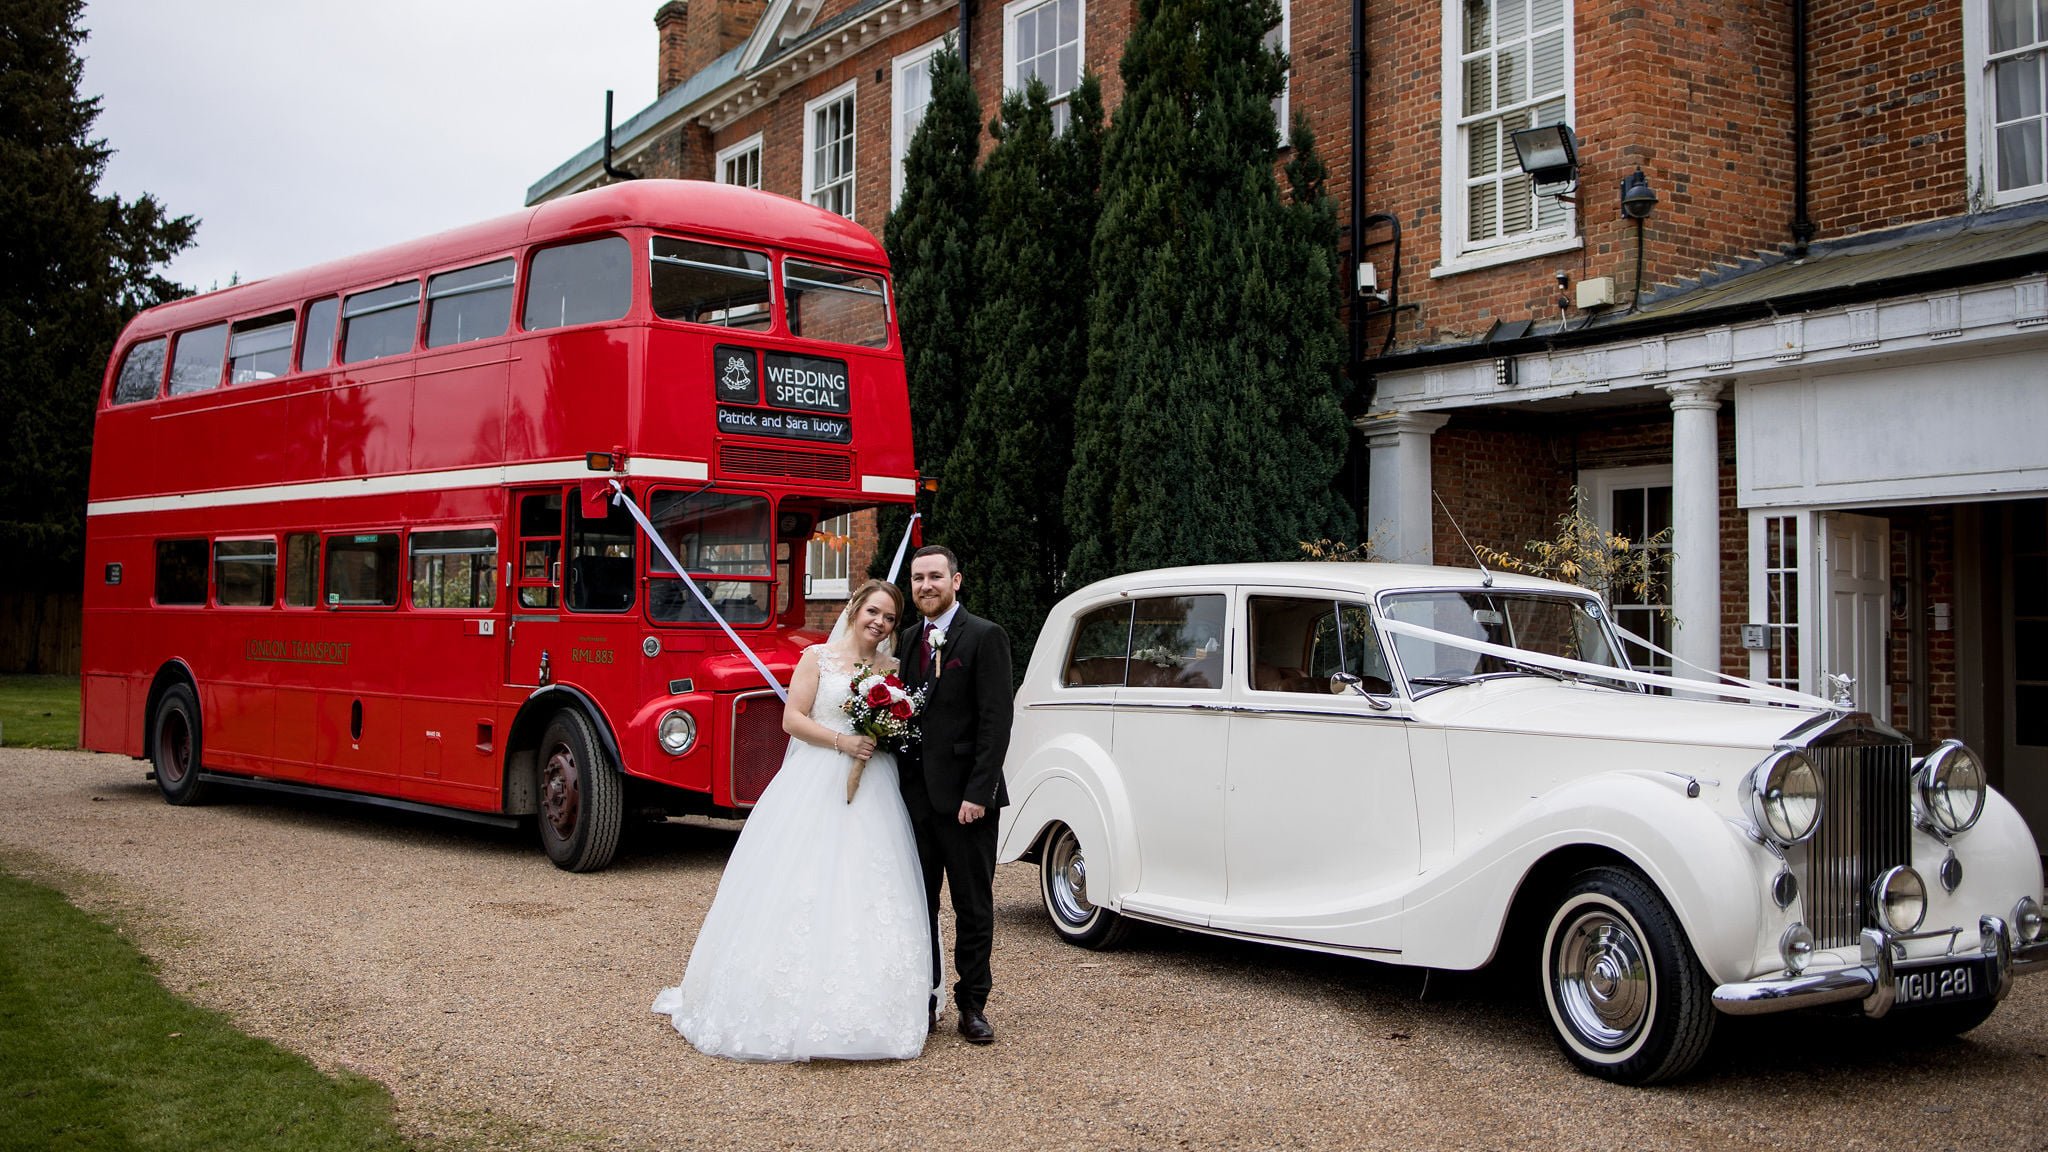 Classic Rolls-Royce followed by a large double decker red bus in front of a wedding venue in Guildford